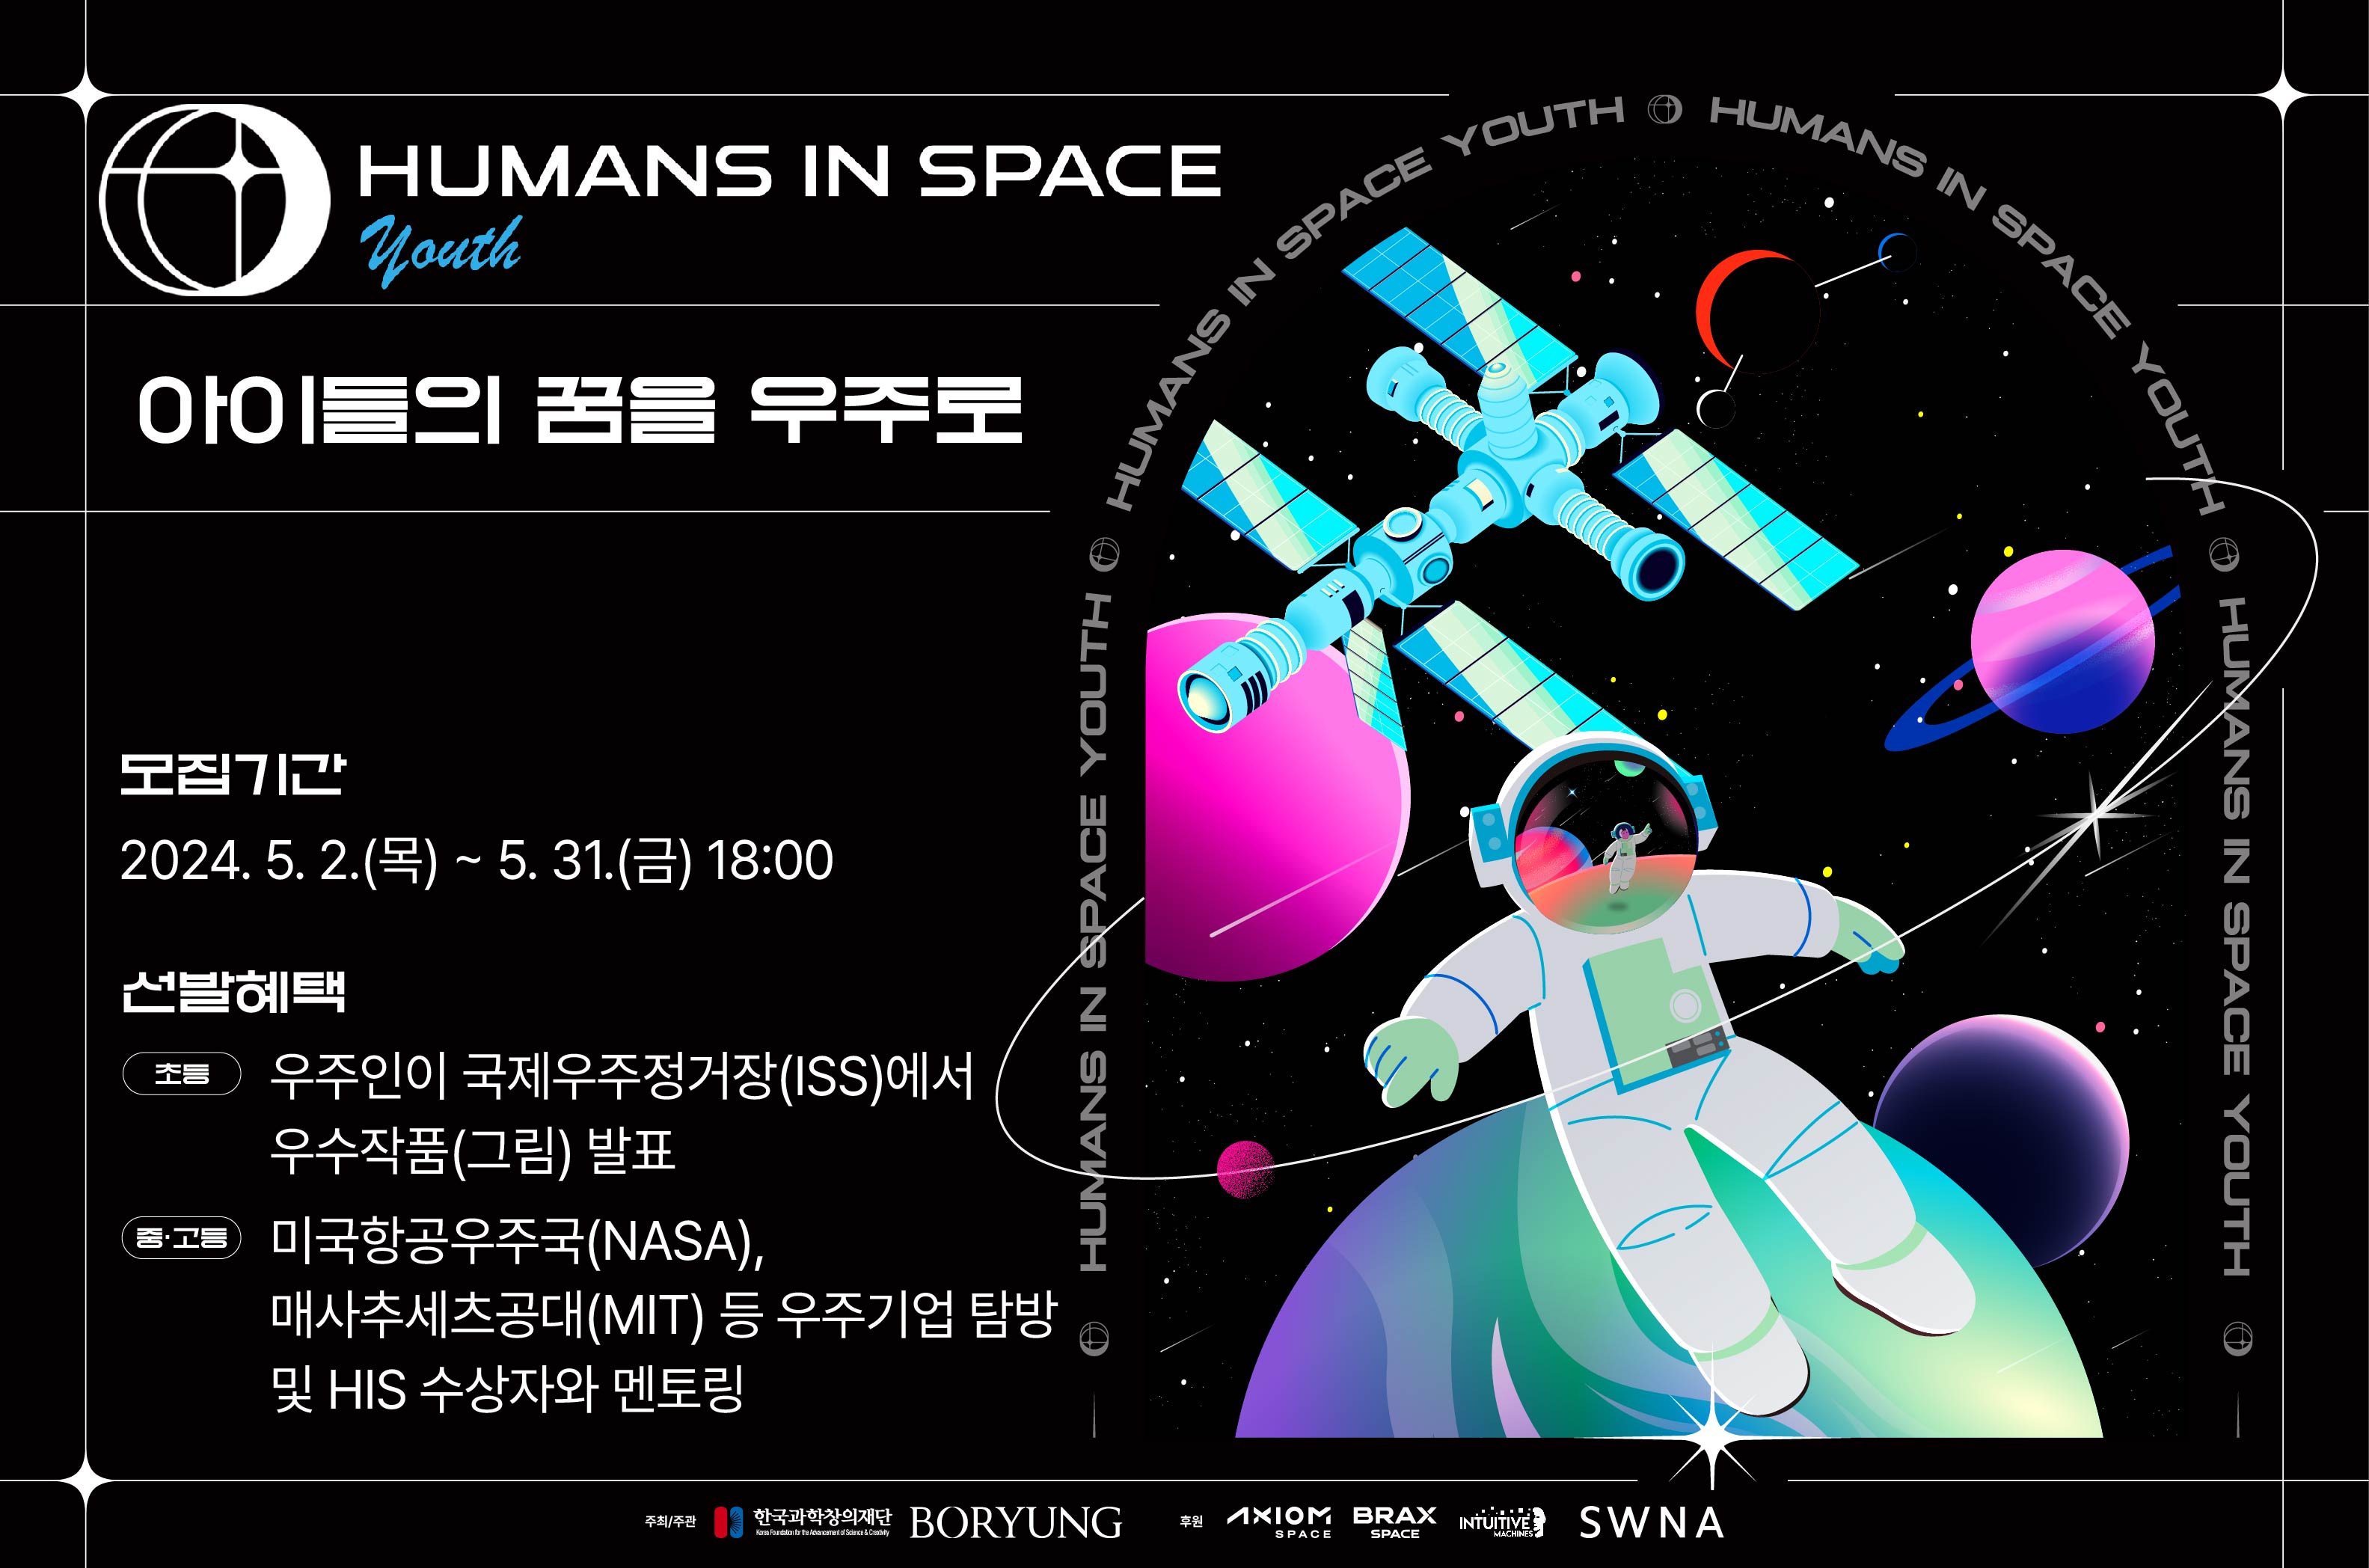 HUMANS IN SPACE-YOUTH(아이들의 꿈을 우주로)